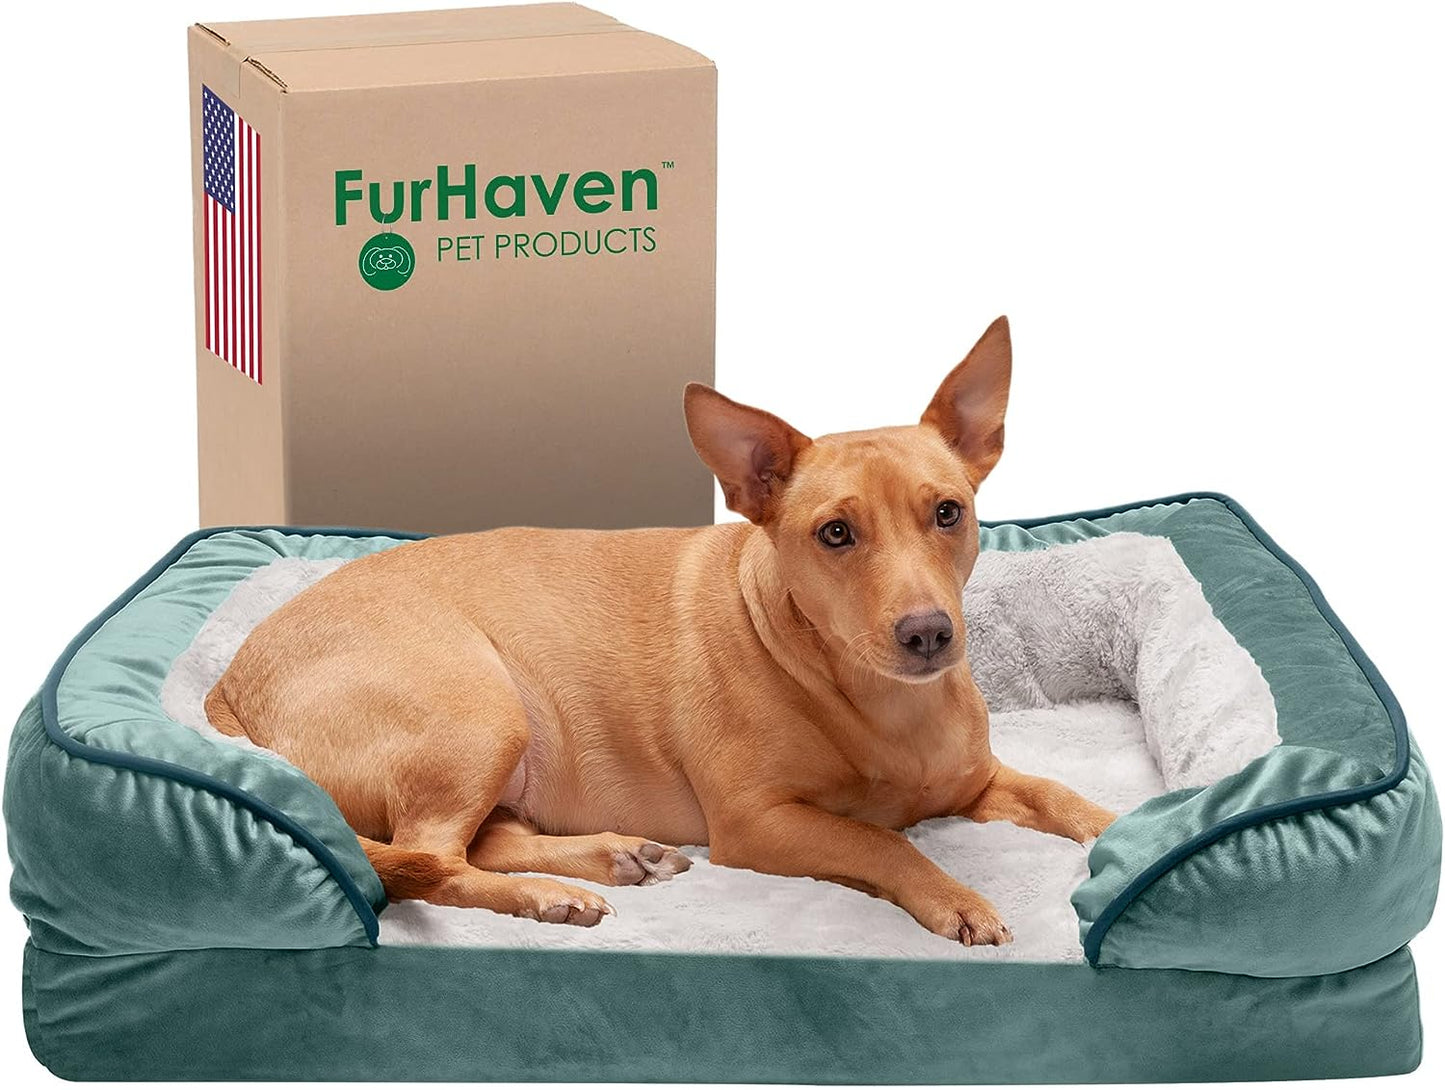 Plush Dog Bed: Luxe Faux Fur & Linen Sofa-Style Dog Bed for Dreamy Rest & Sweet Snuggles | Orthopedic Support, Plush Design, and Easy-Care Luxury for Your Furry Amigo!